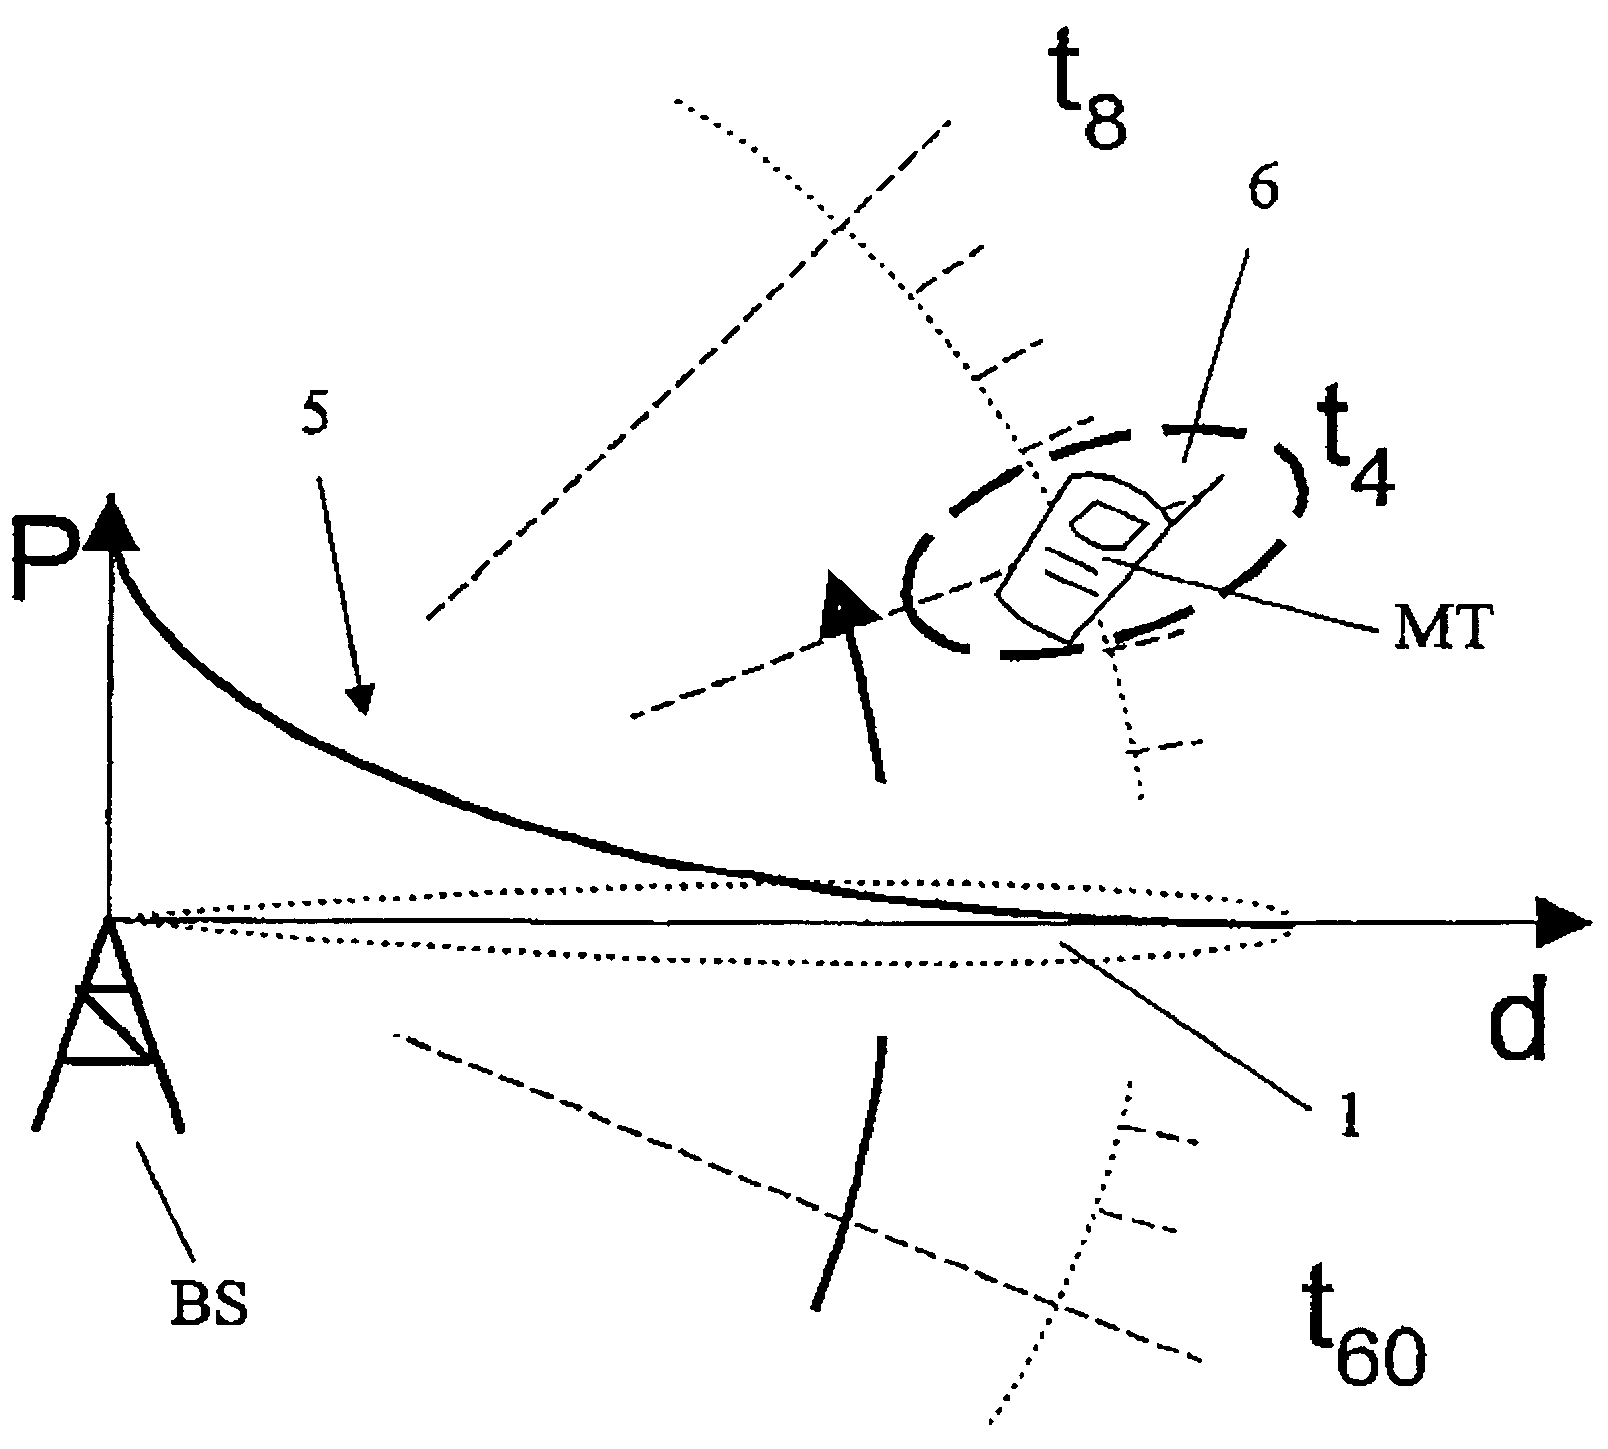 Method for determining a position with the aid of a radio signal having a rotating transmission characteristic